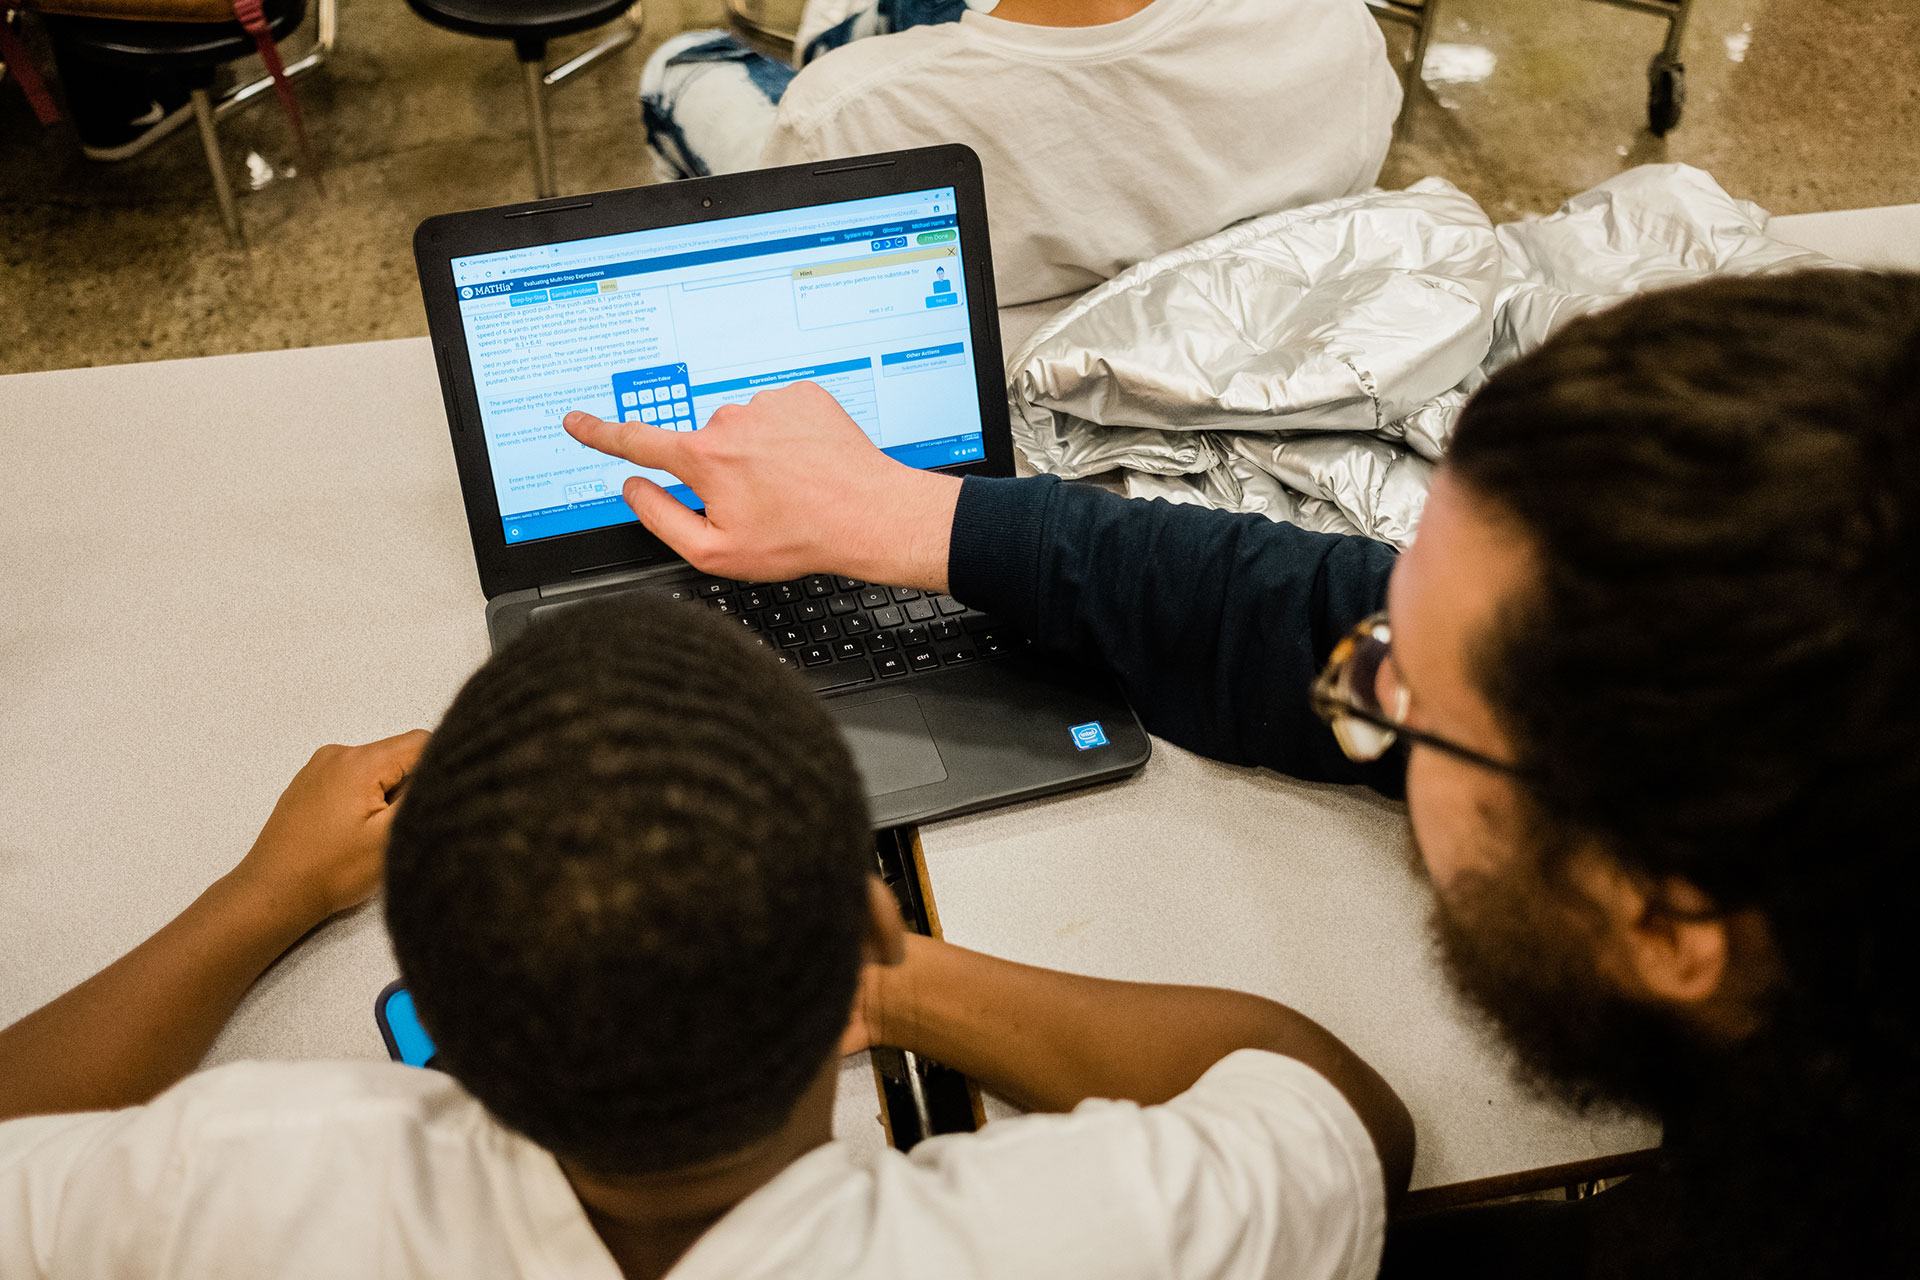 A Ready to Learn mentor uses software to tailor their instruction / Photo by Ben Filio